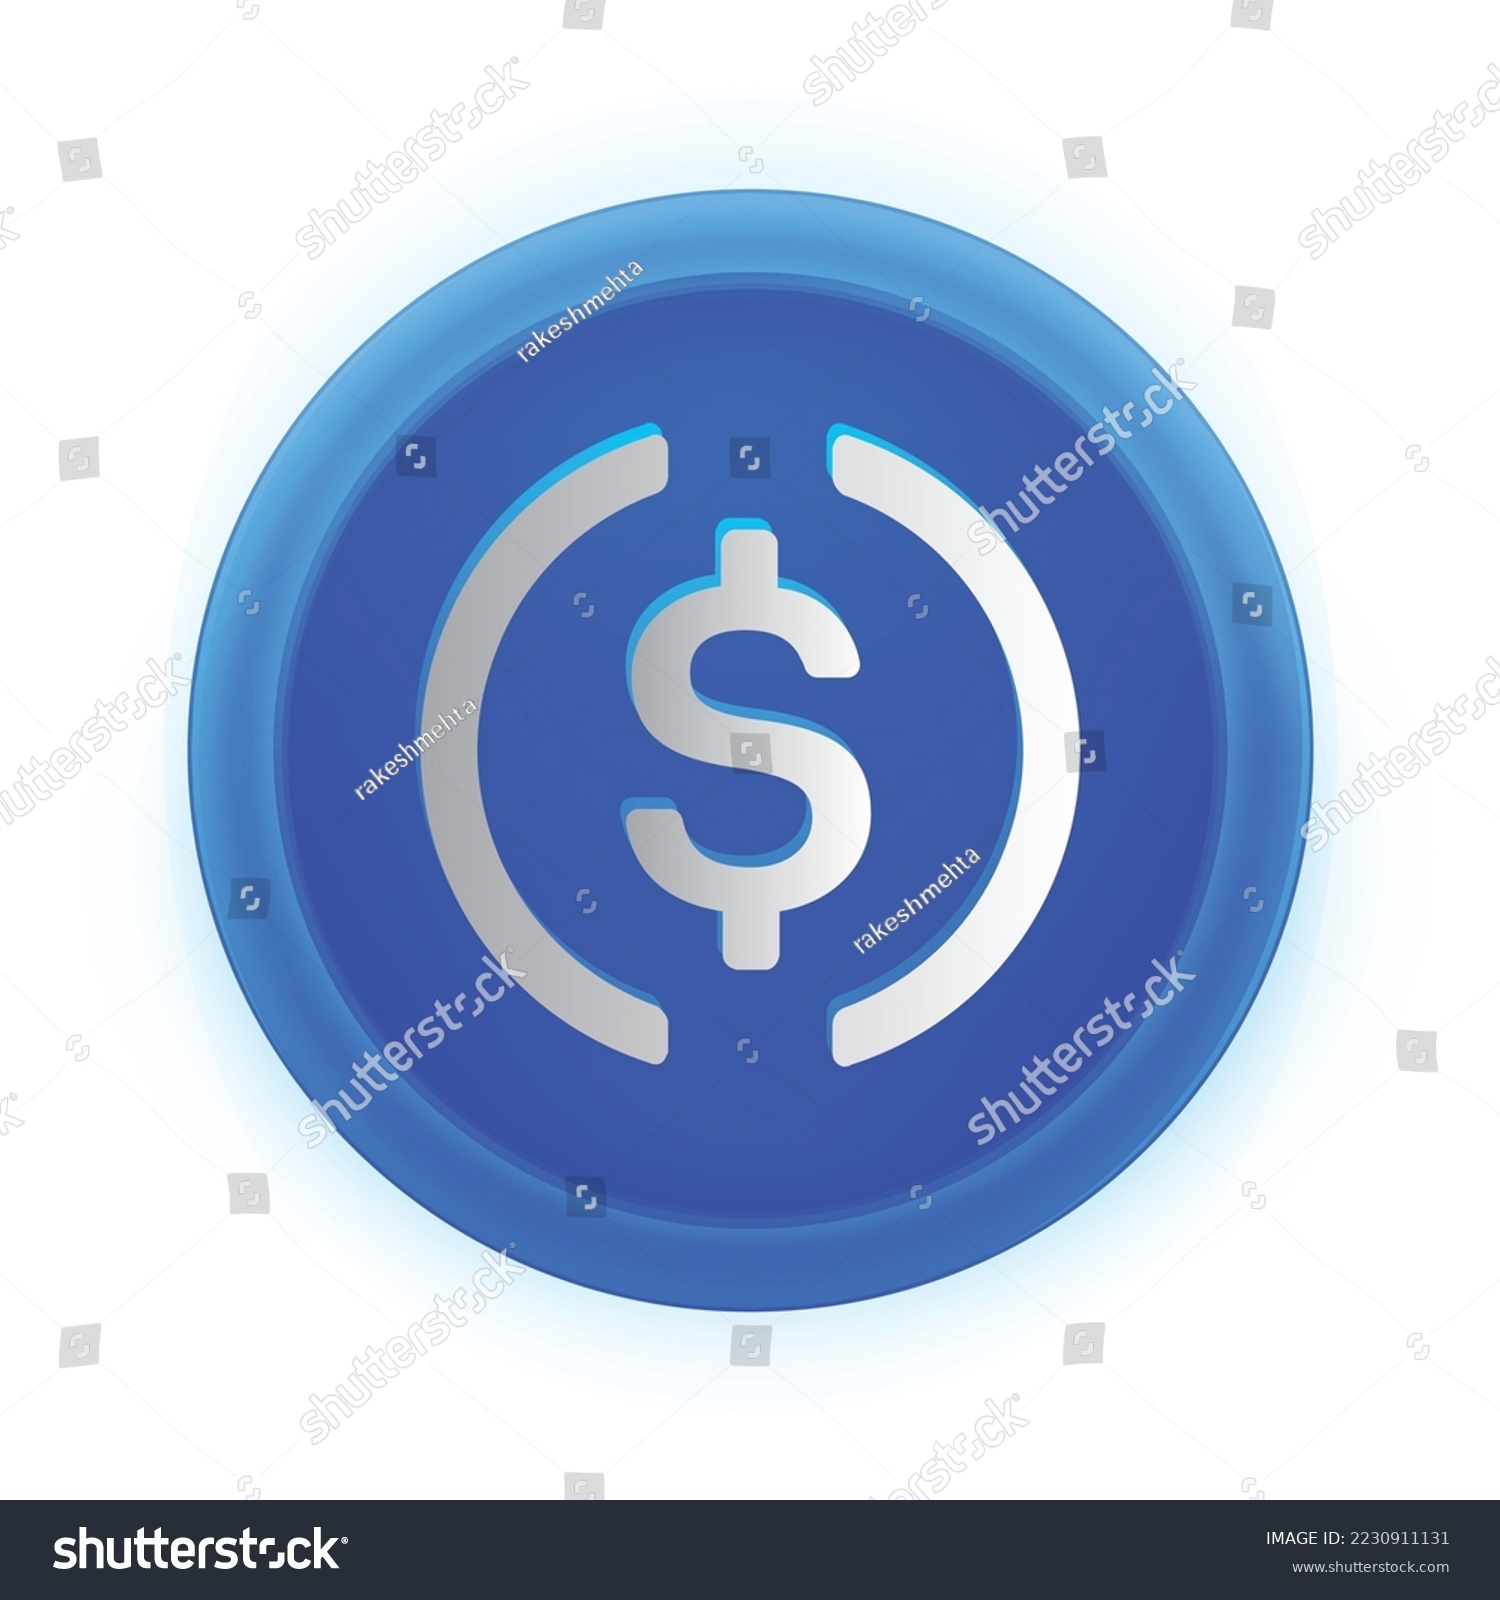 SVG of USD Coin (USDC) crypto logo isolated on white background. USDC Cryptocurrency coin token vector svg